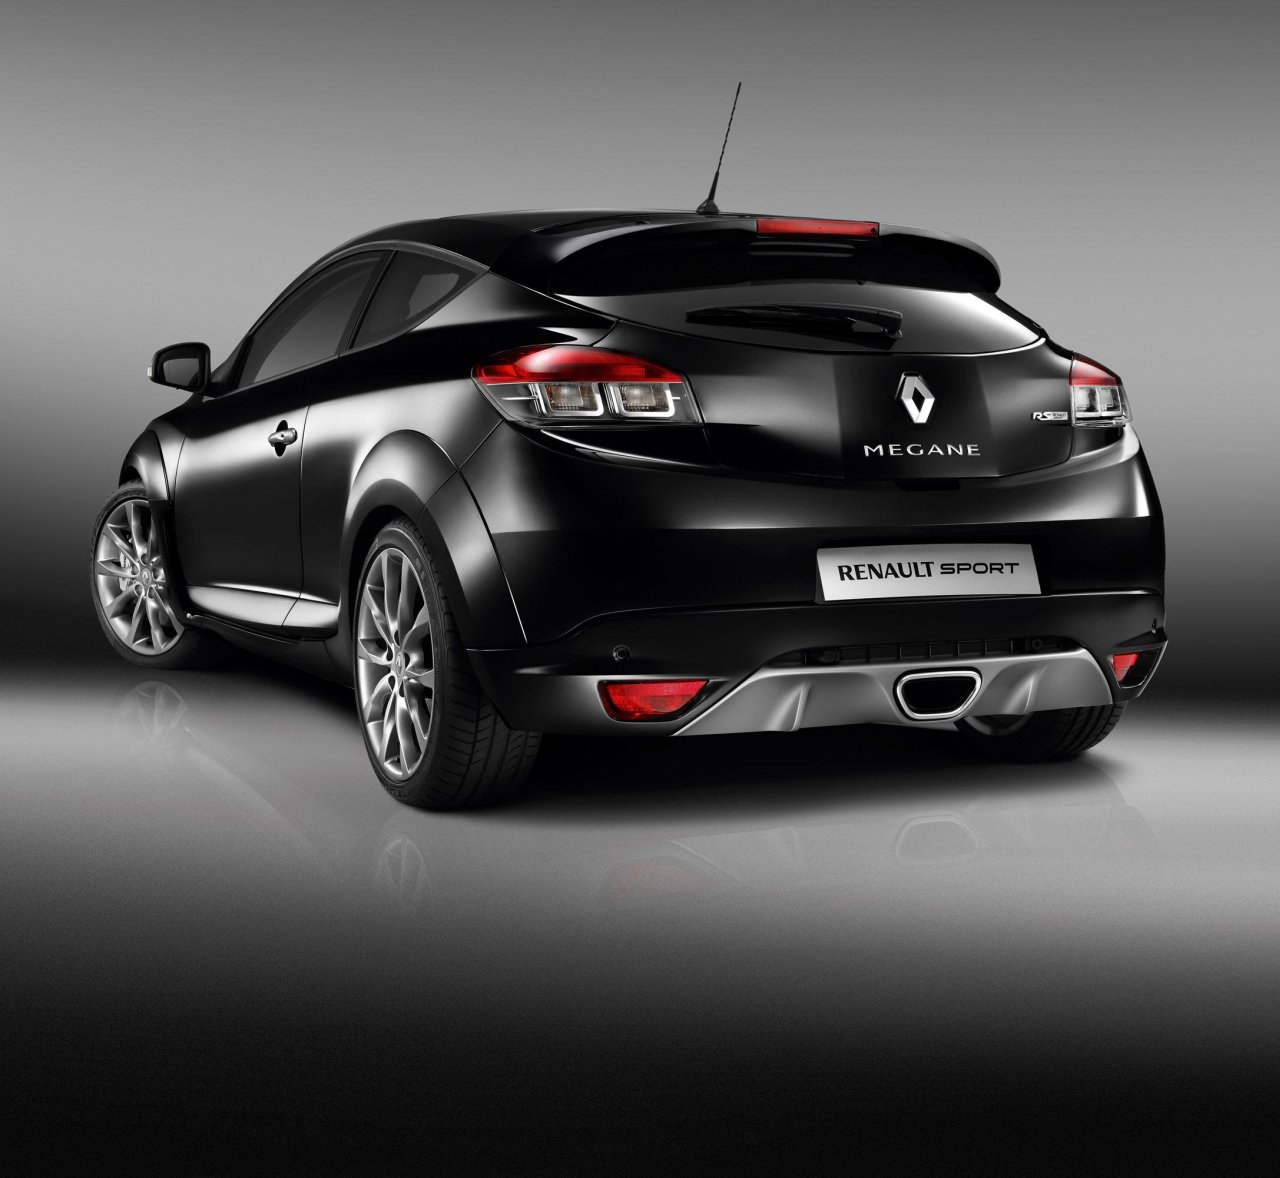 the Renault Megane RS just